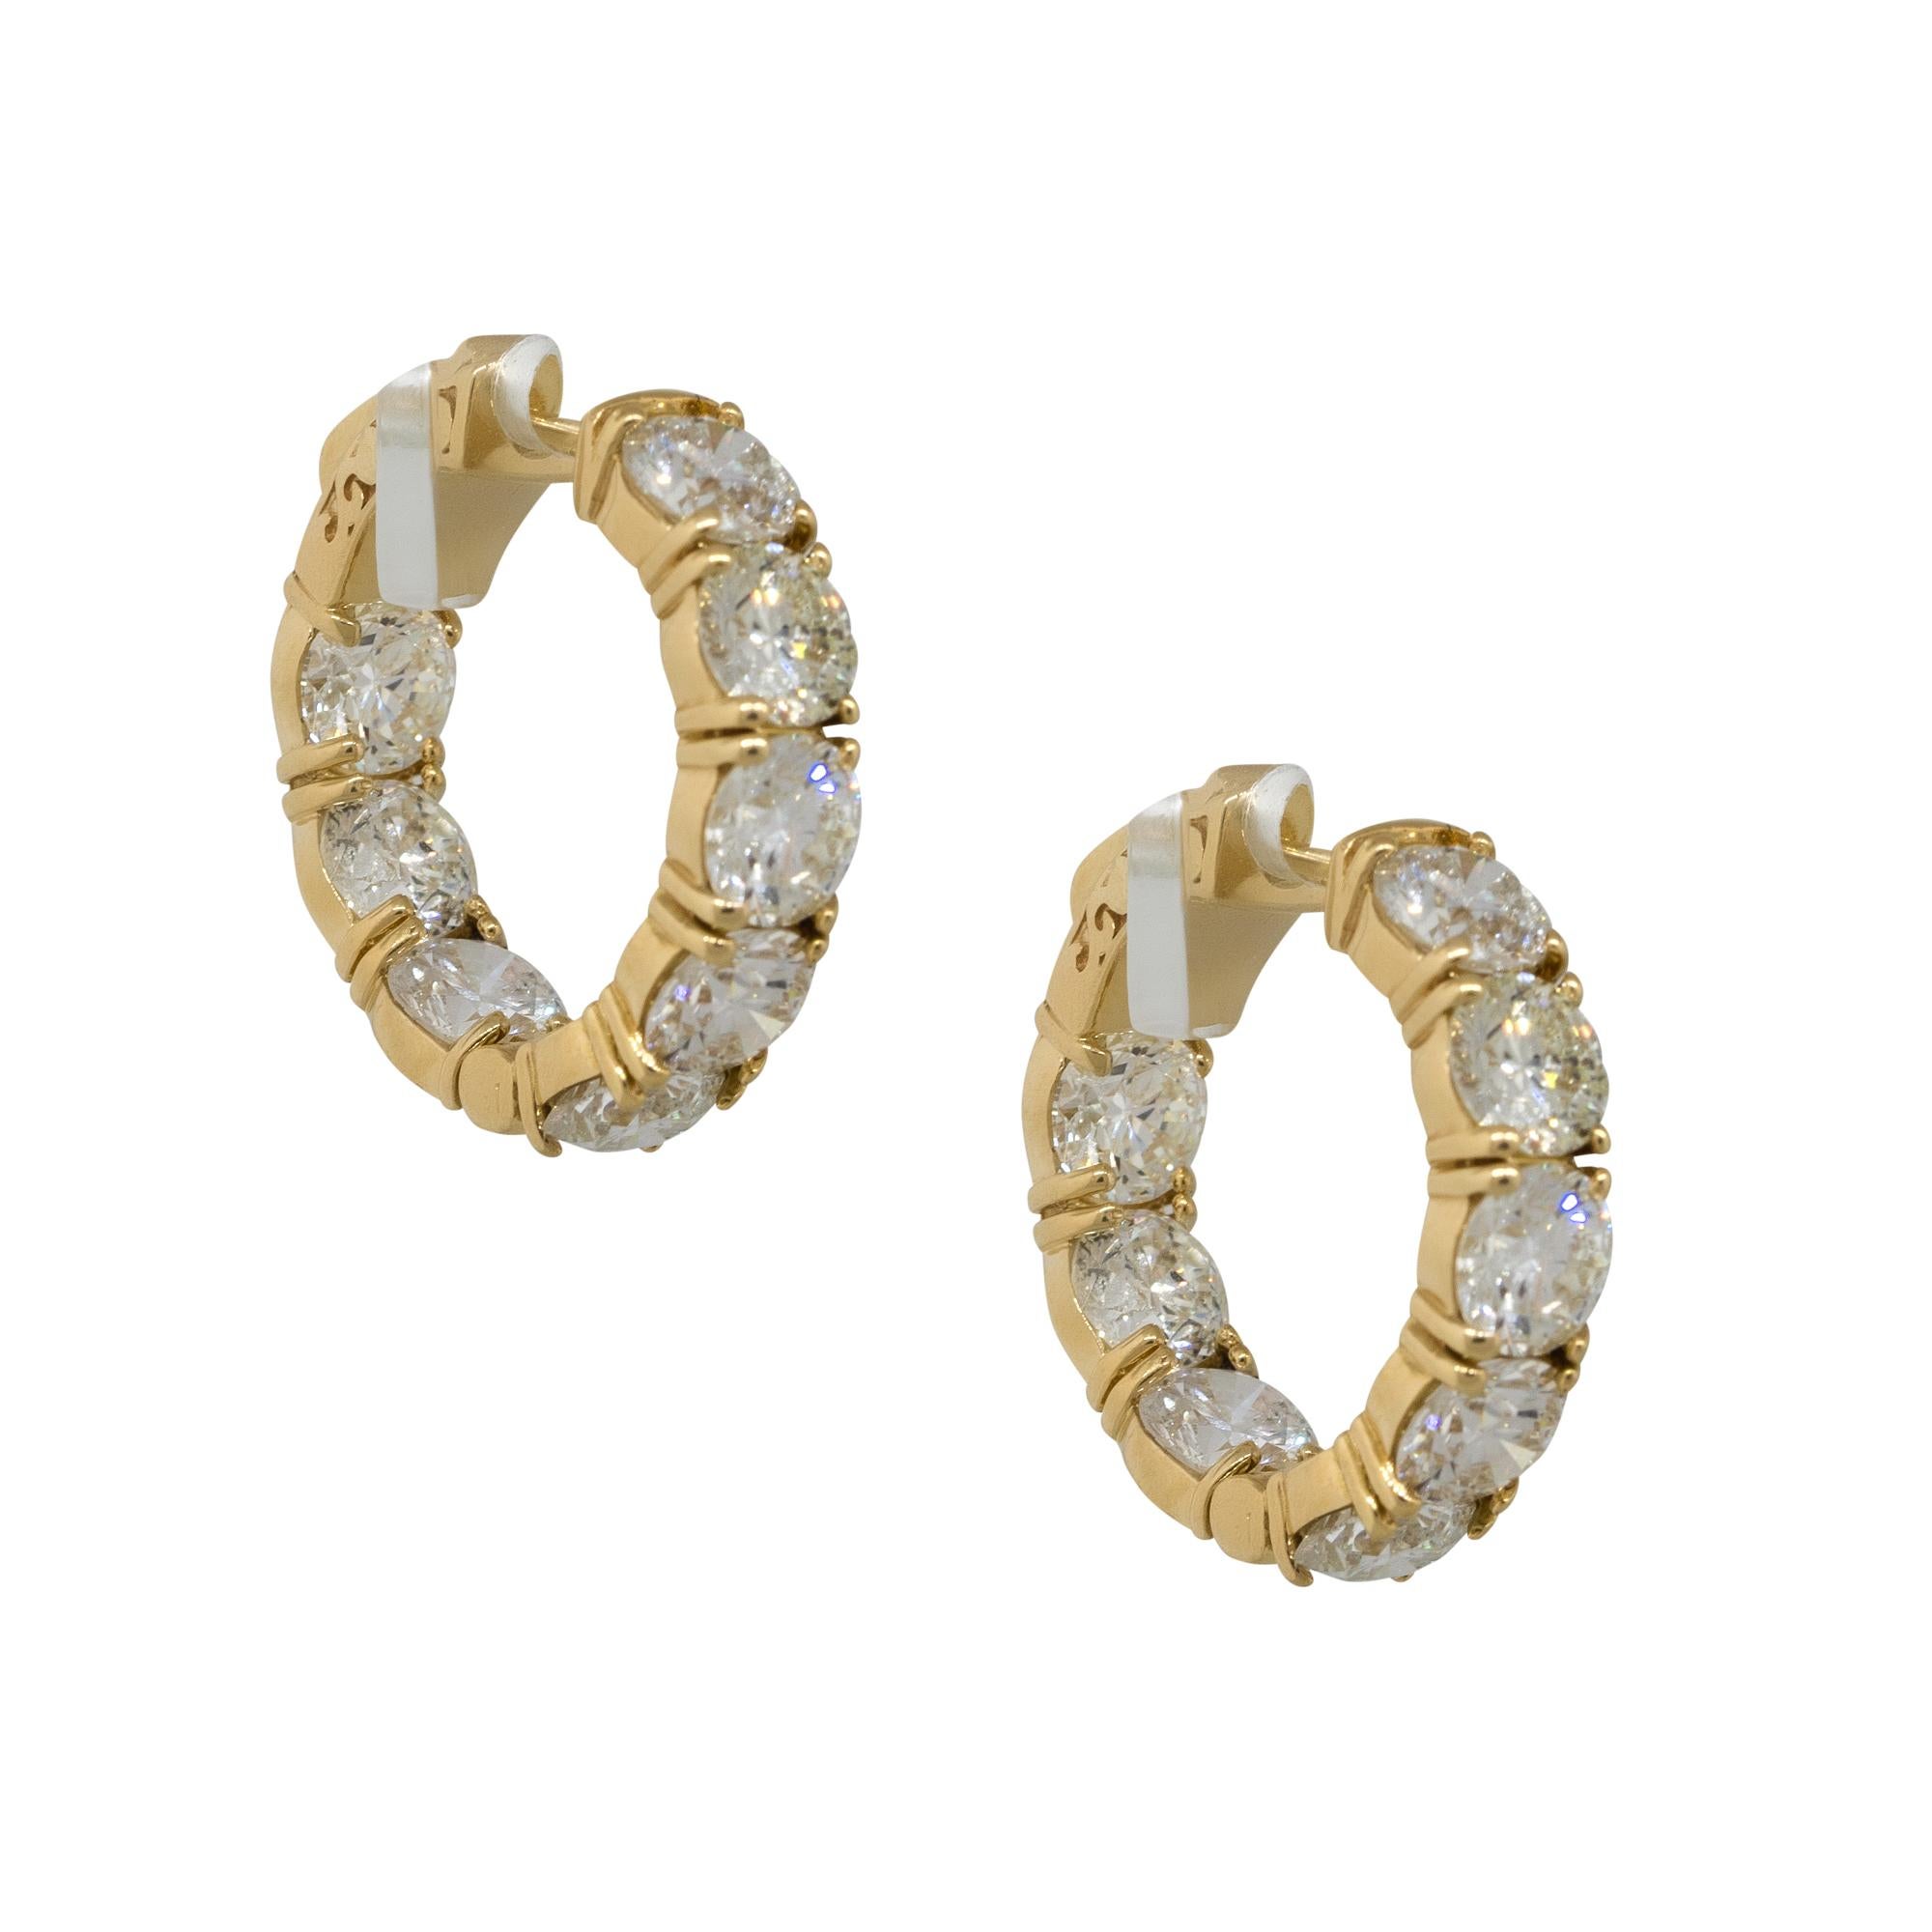 Material: 18k Yellow Gold
Diamond Details: Approx. 8.30ctw of round cut diamonds. Diamonds are G/H in color and VS in clarity. 16 stones
Earring Measurements: 22mm x 5.30mm x 21mm
Total Weight: 10.3g (6.6dwt) 
Earring backs: Latch back
Additional